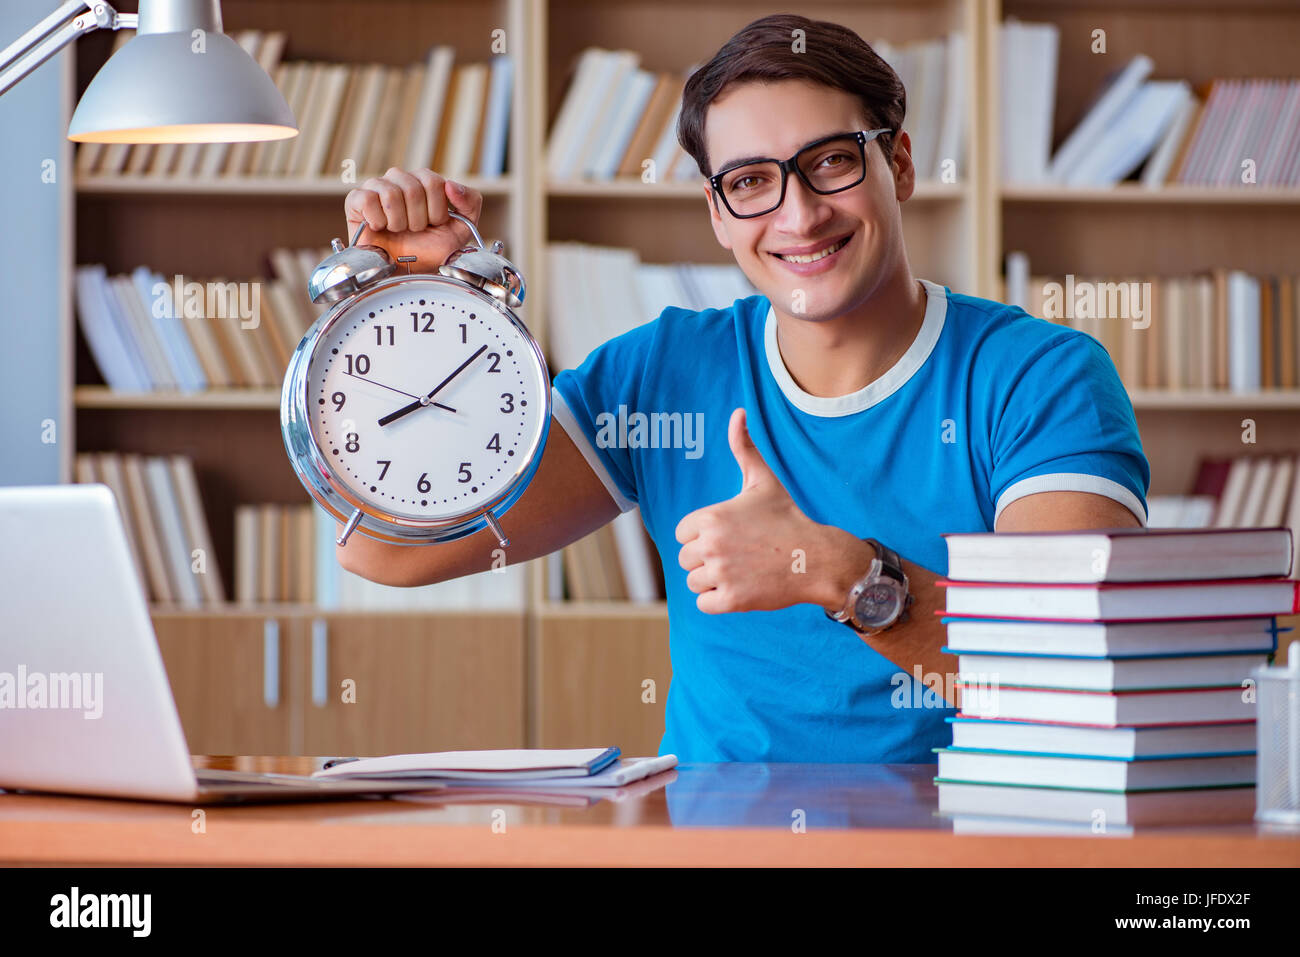 Student preparing for college exams Stock Photo